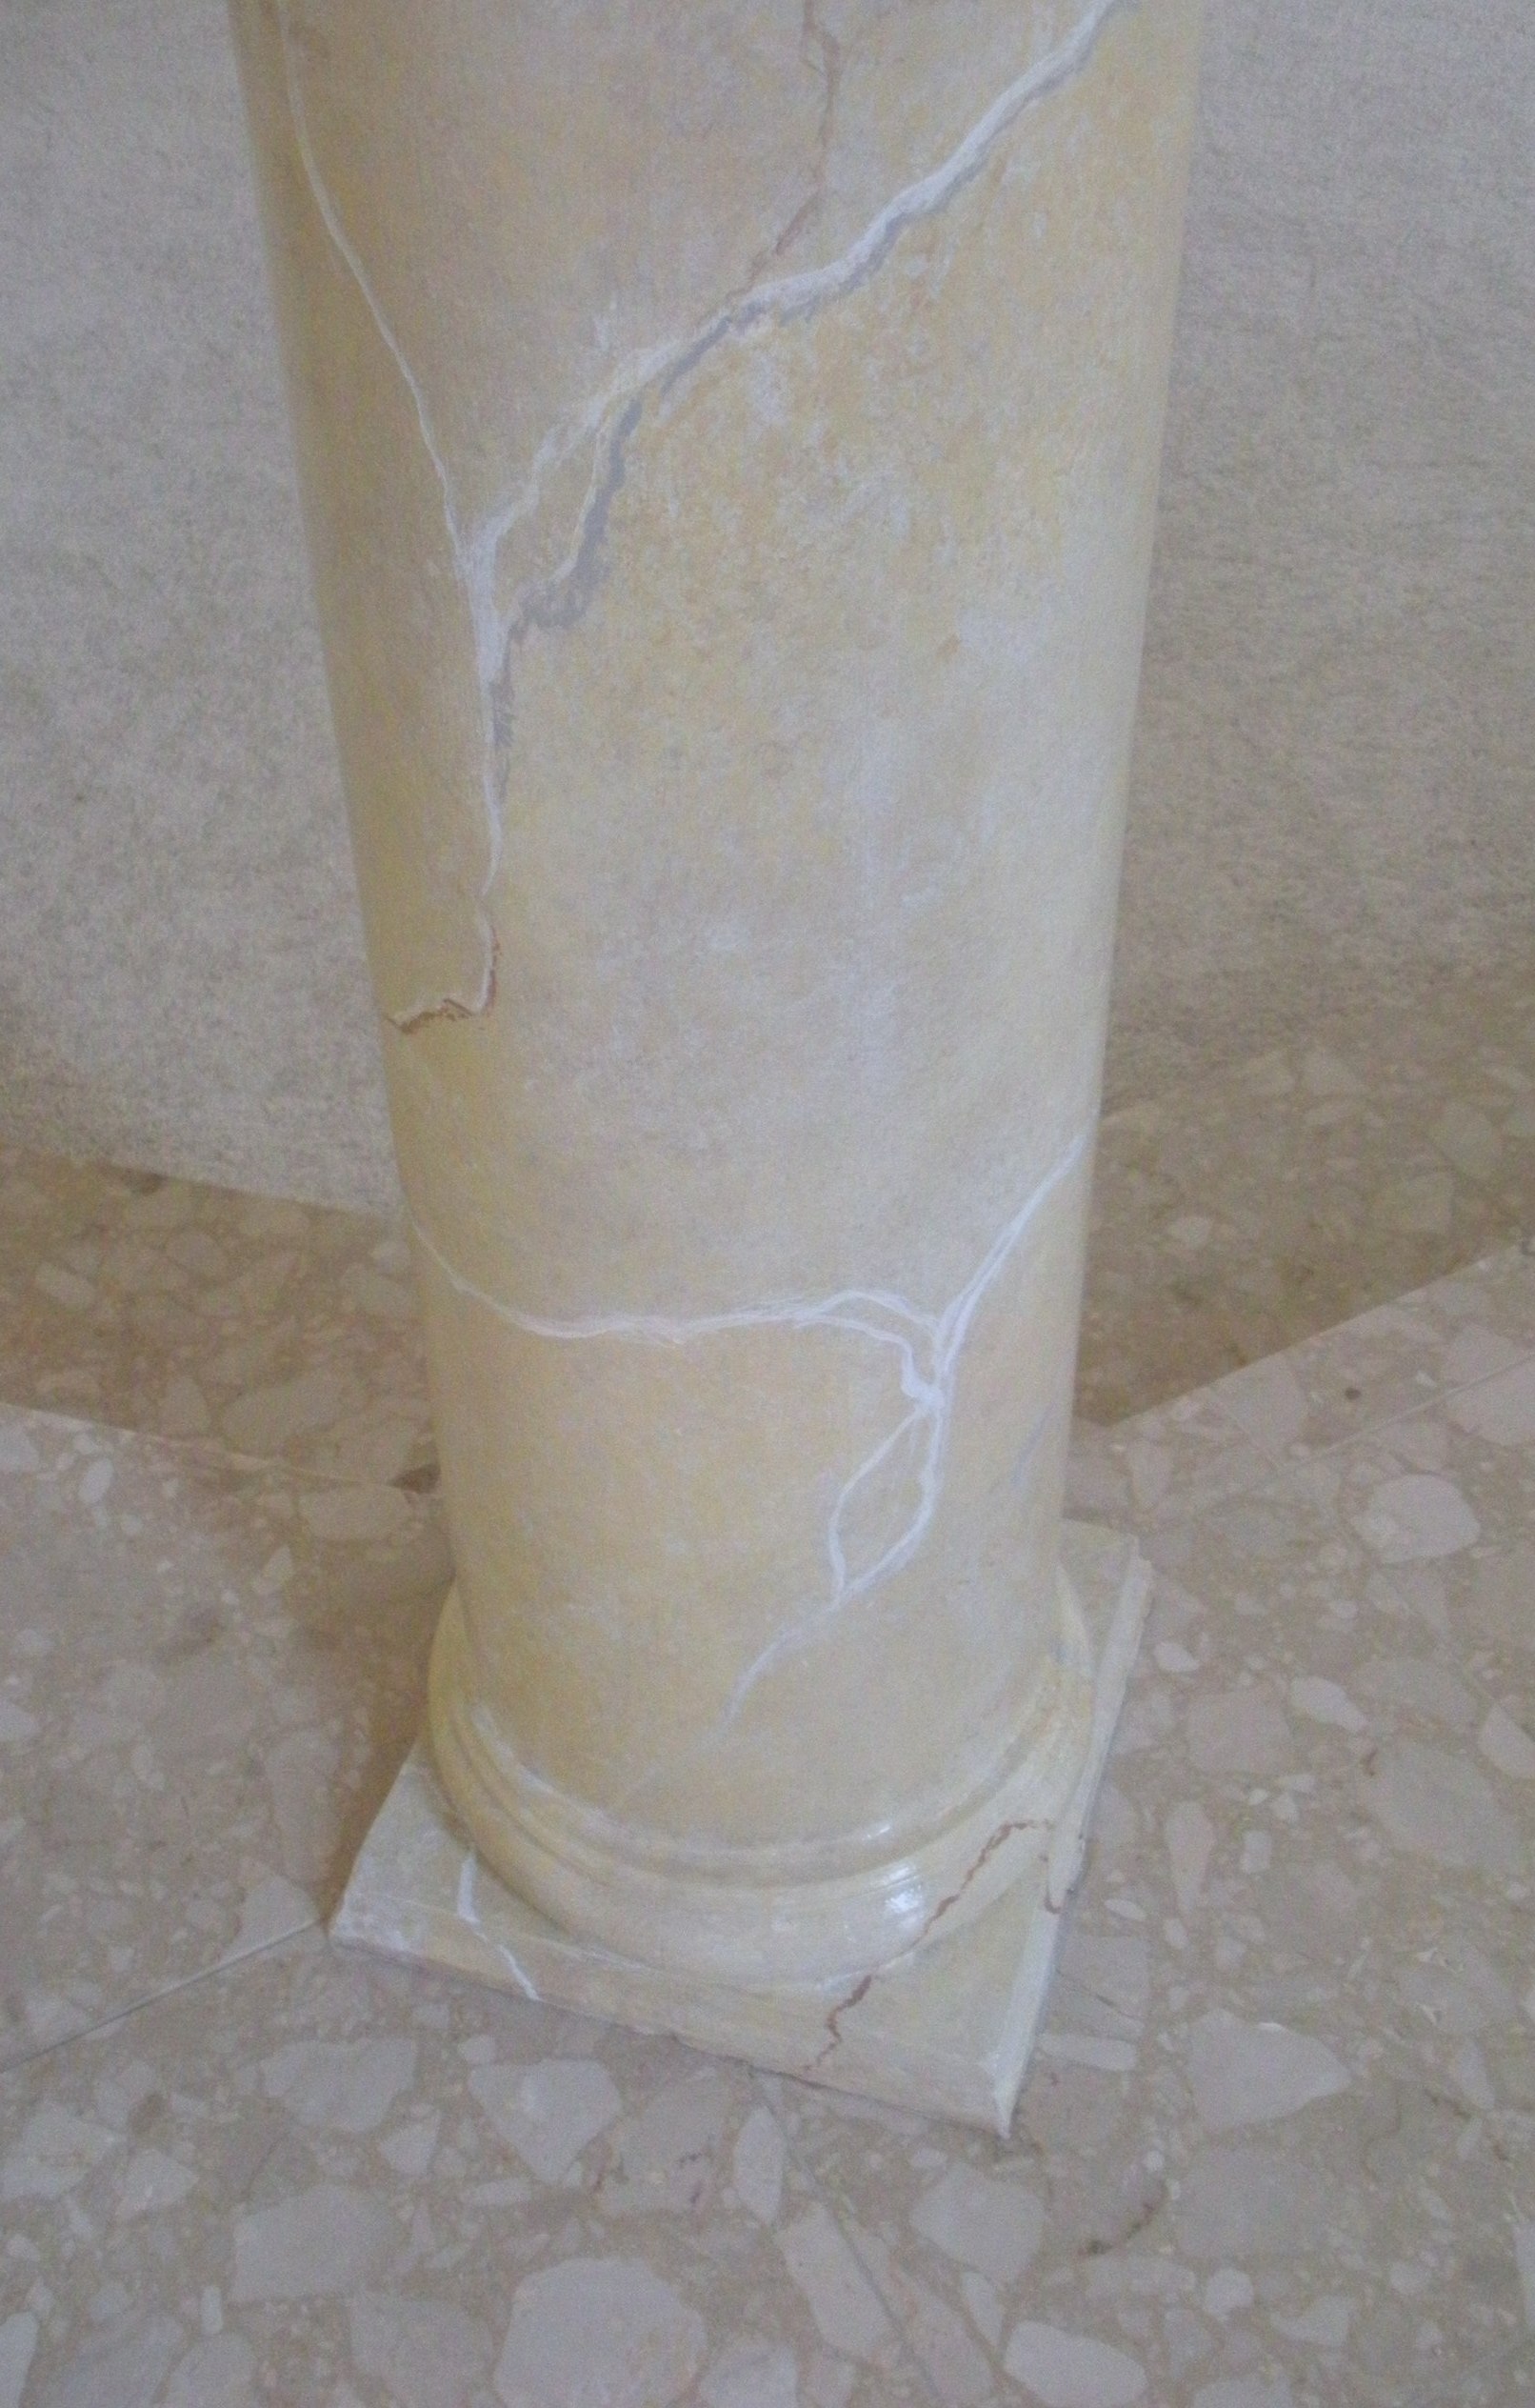 I'm a wooden column that has been fauxed to look like I'm made of marble!